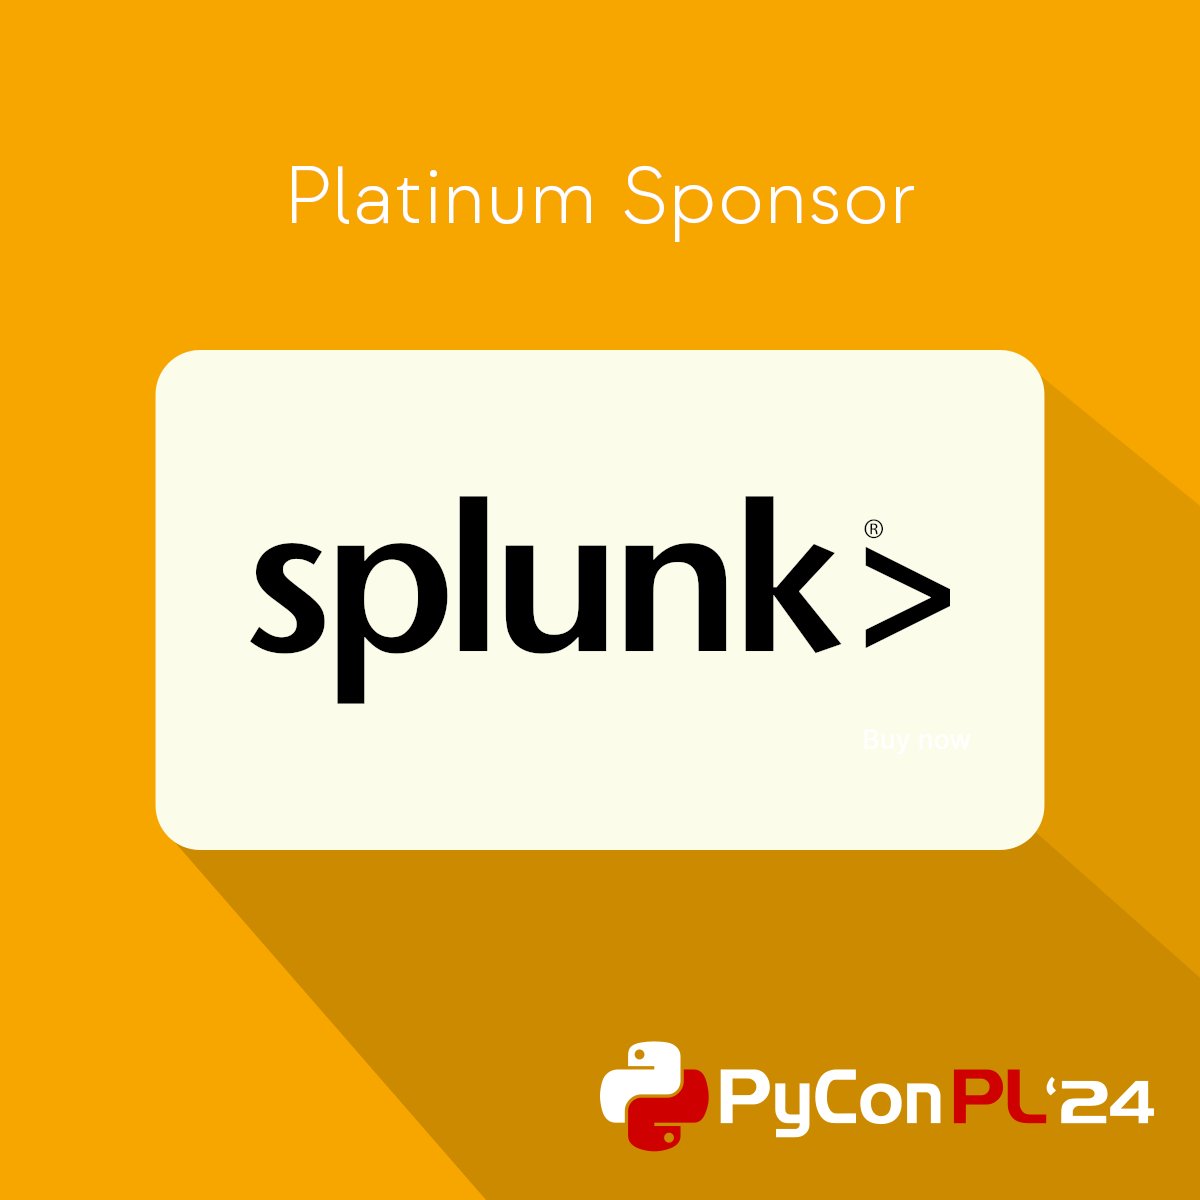 We are delighted to announce @splunk as the first and also the Platinum Sponsor of PyCon PL 2024 🐍❤️🇵🇱. Splunk is a company that helps keep your digital systems secure and reliable. 👍 For more information, visit their website: splunk.com